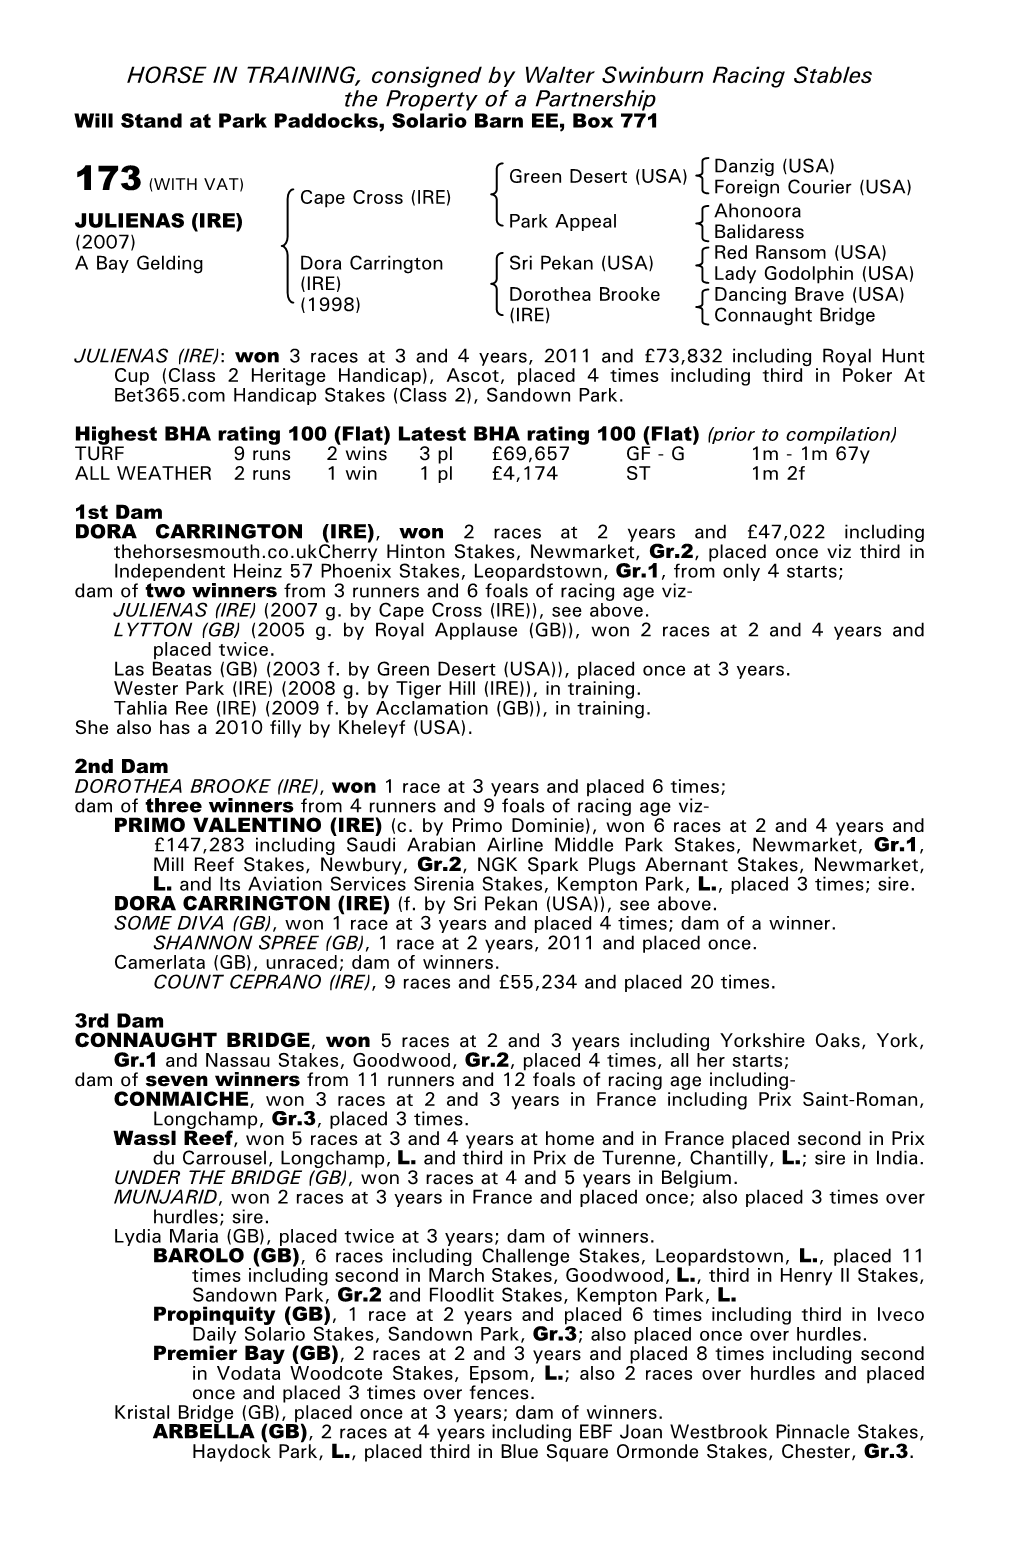 HORSE in TRAINING, Consigned by Walter Swinburn Racing Stables the Property of a Partnership Will Stand at Park Paddocks, Solario Barn EE, Box 771